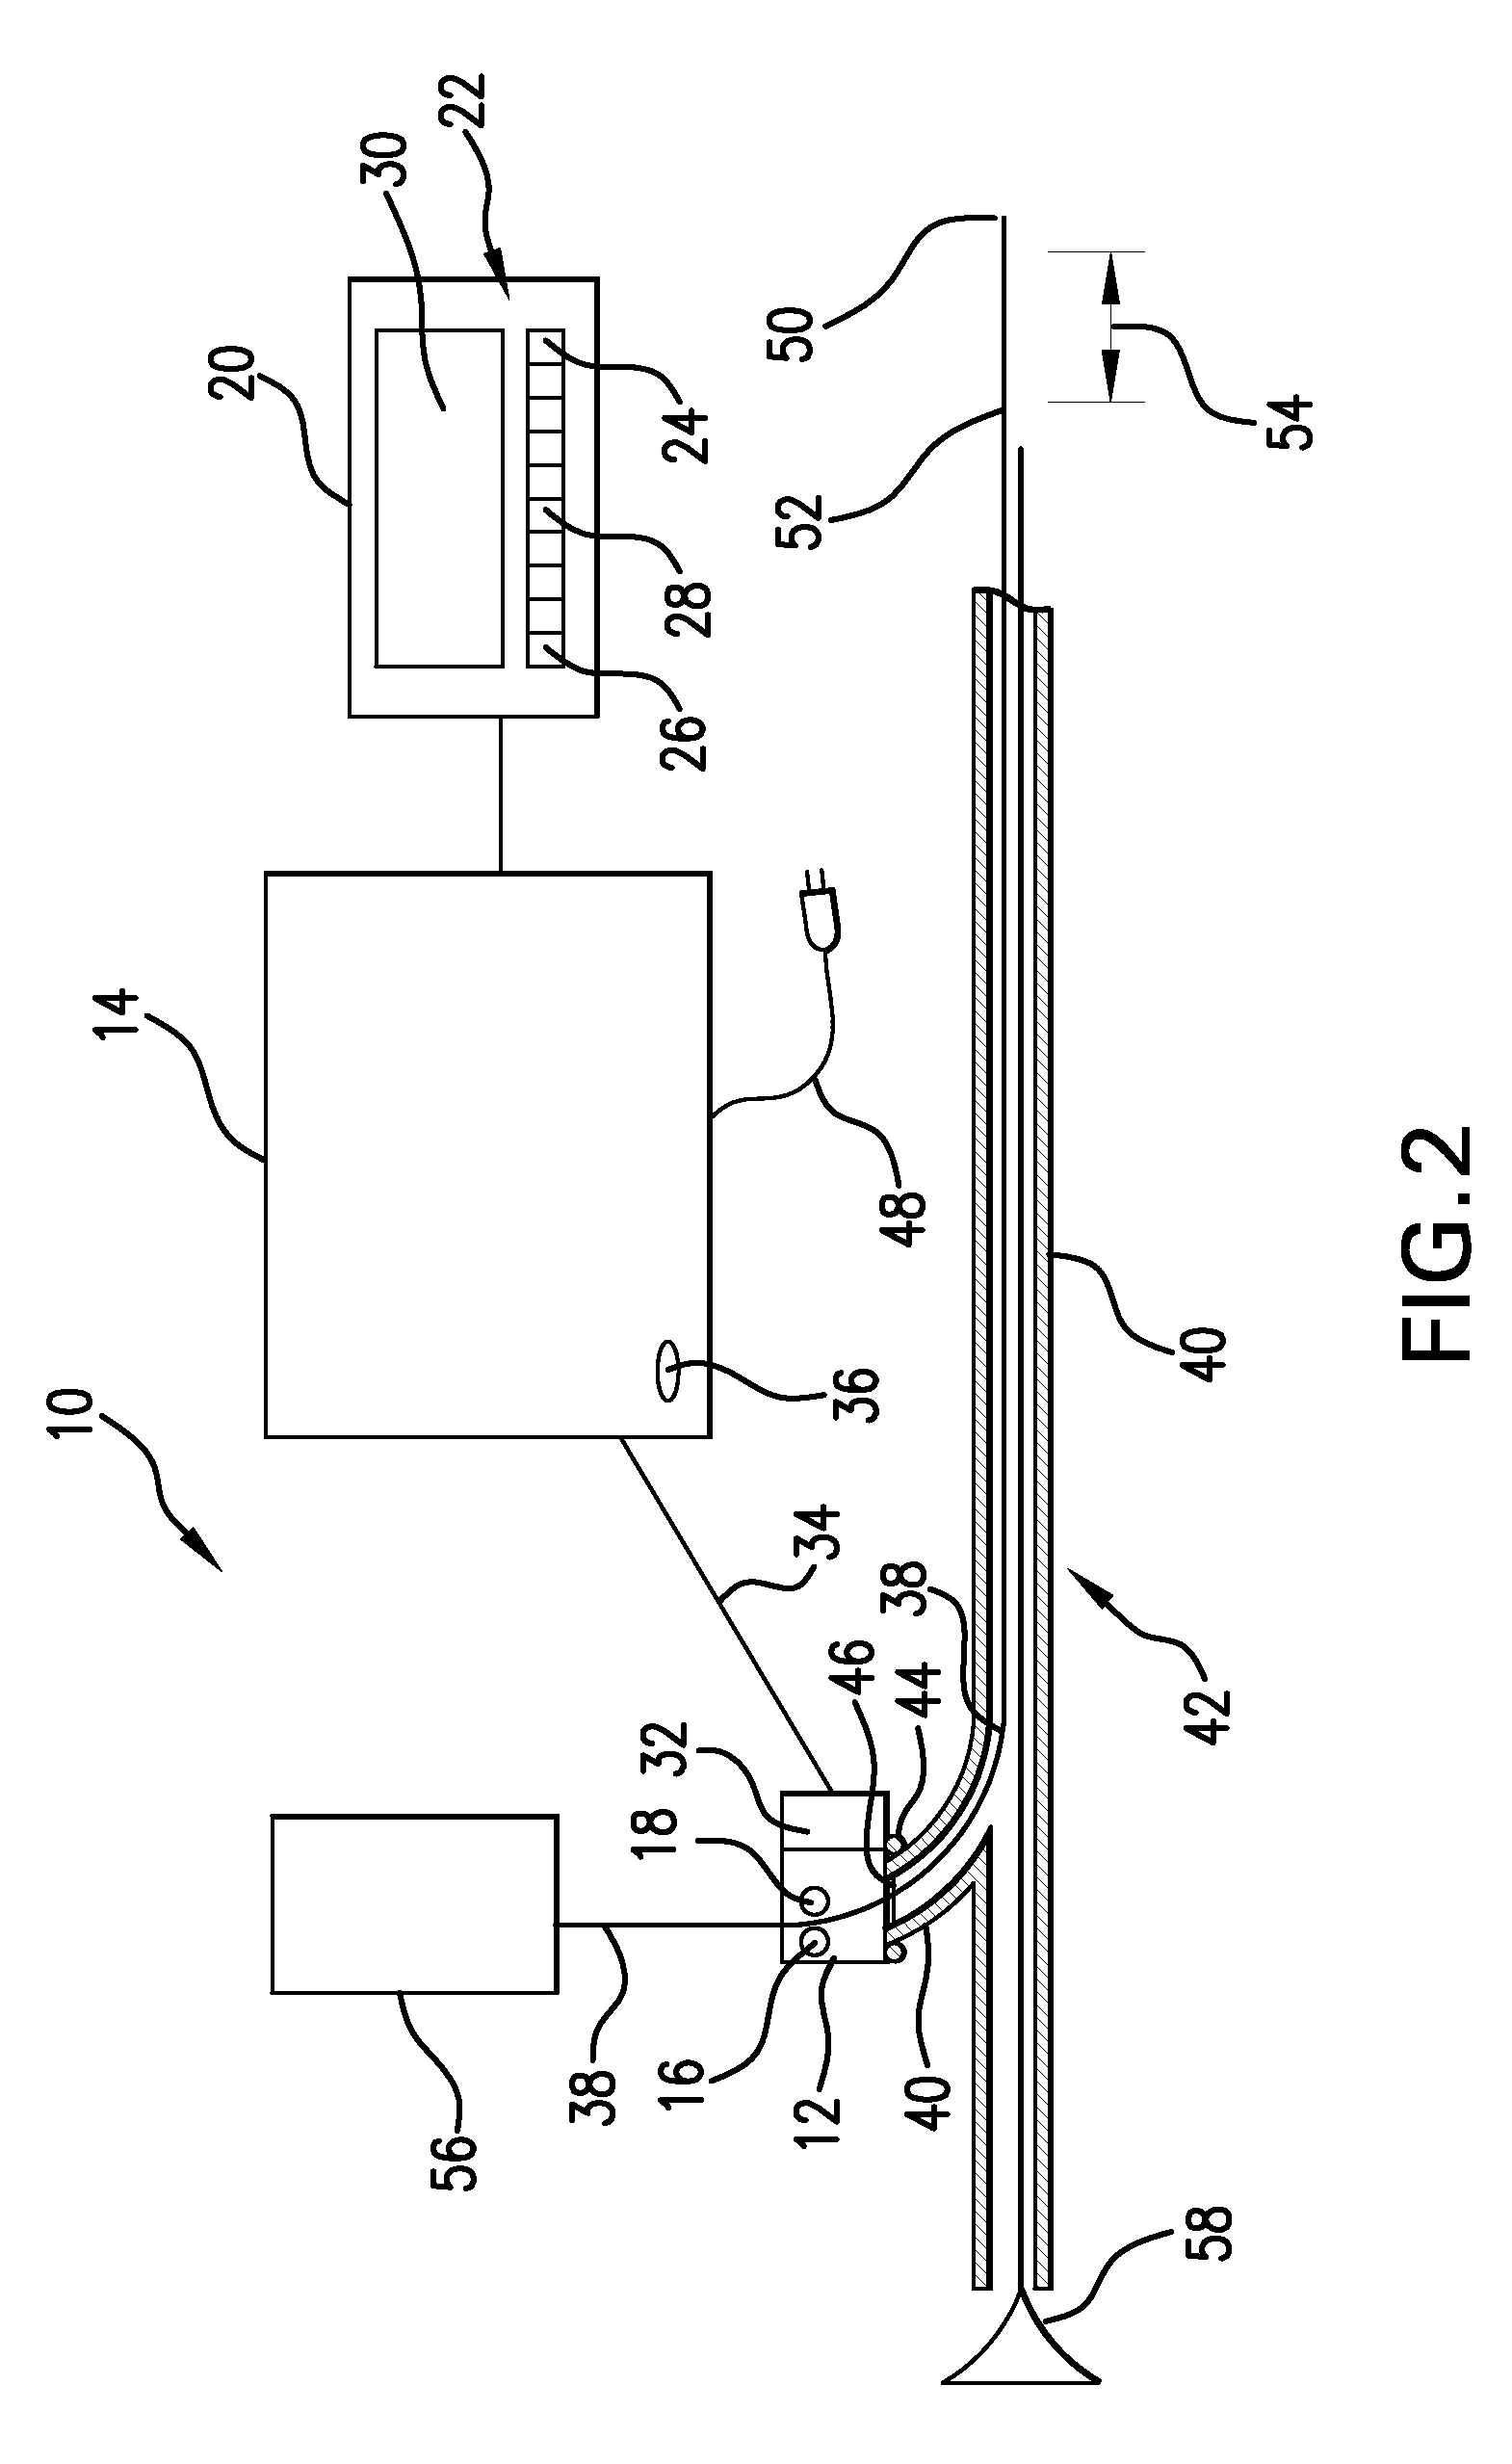 Device for preventing endoscope damage by errant laser fire in a surgical laser